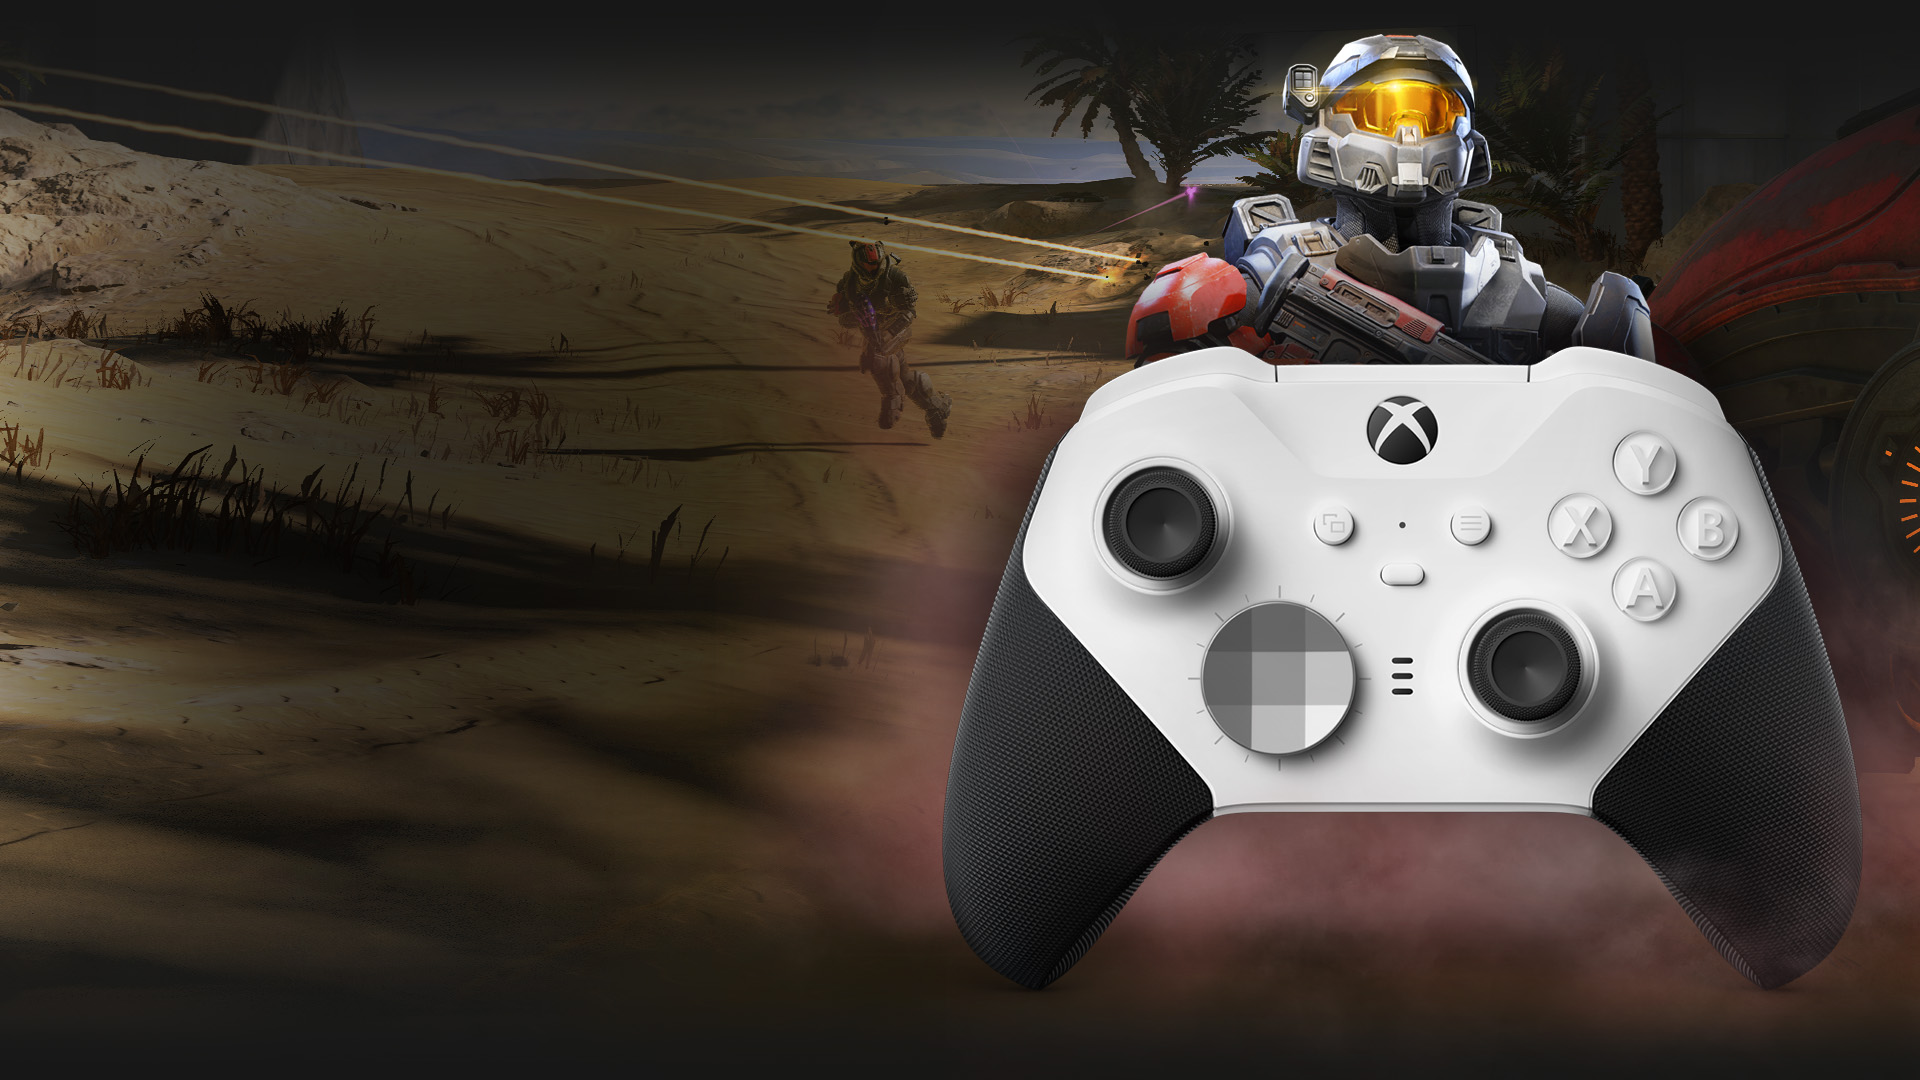 A multiplayer Spartan stands behind the Xbox Elite Wireless Controller Series 2 – Core (White). Two teams of Spartans battle it out in a desert environment in the background.